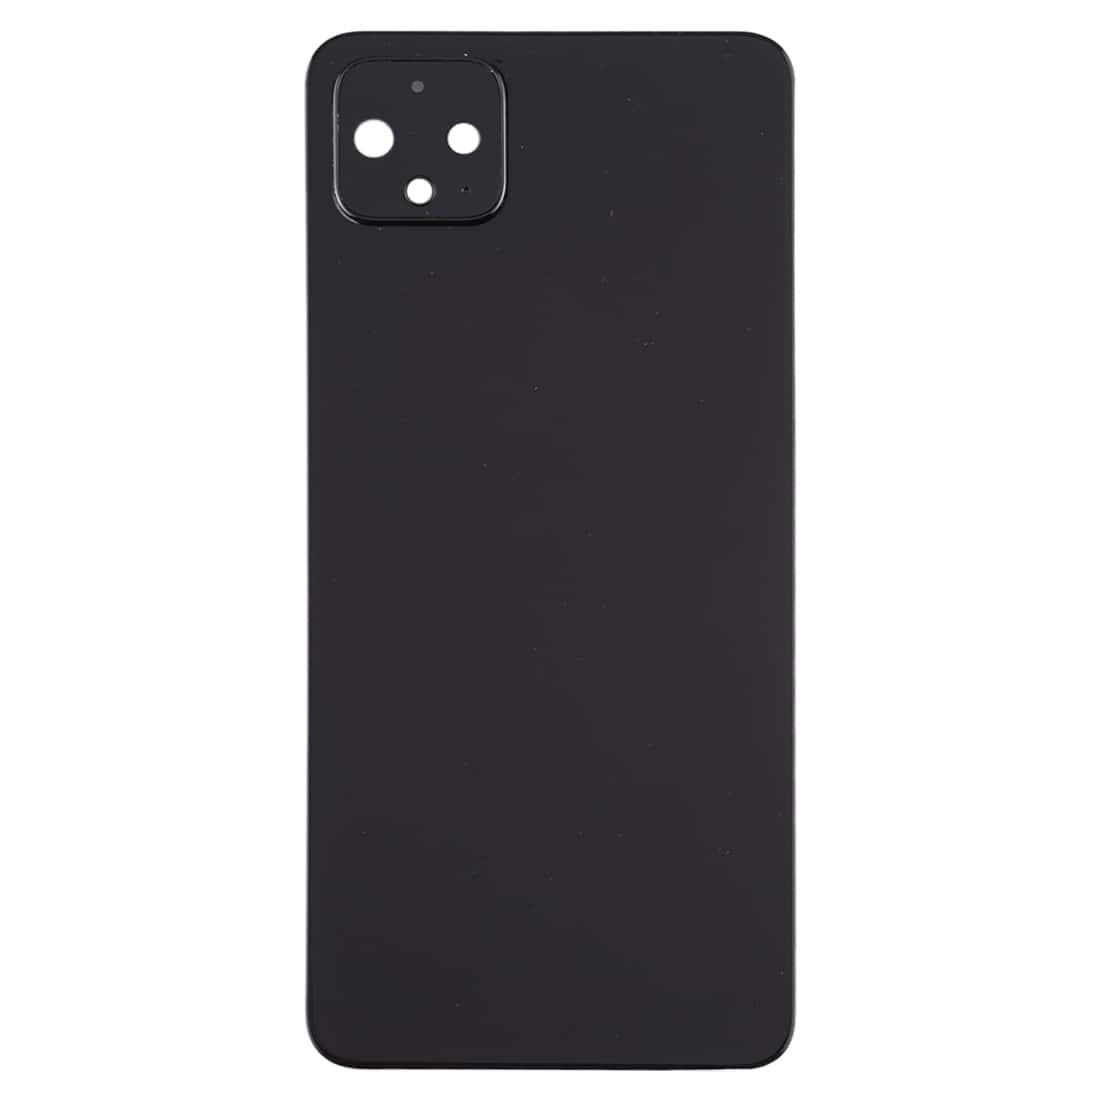 Back Glass Panel for Google Pixel 4XL Black with Camera Lens